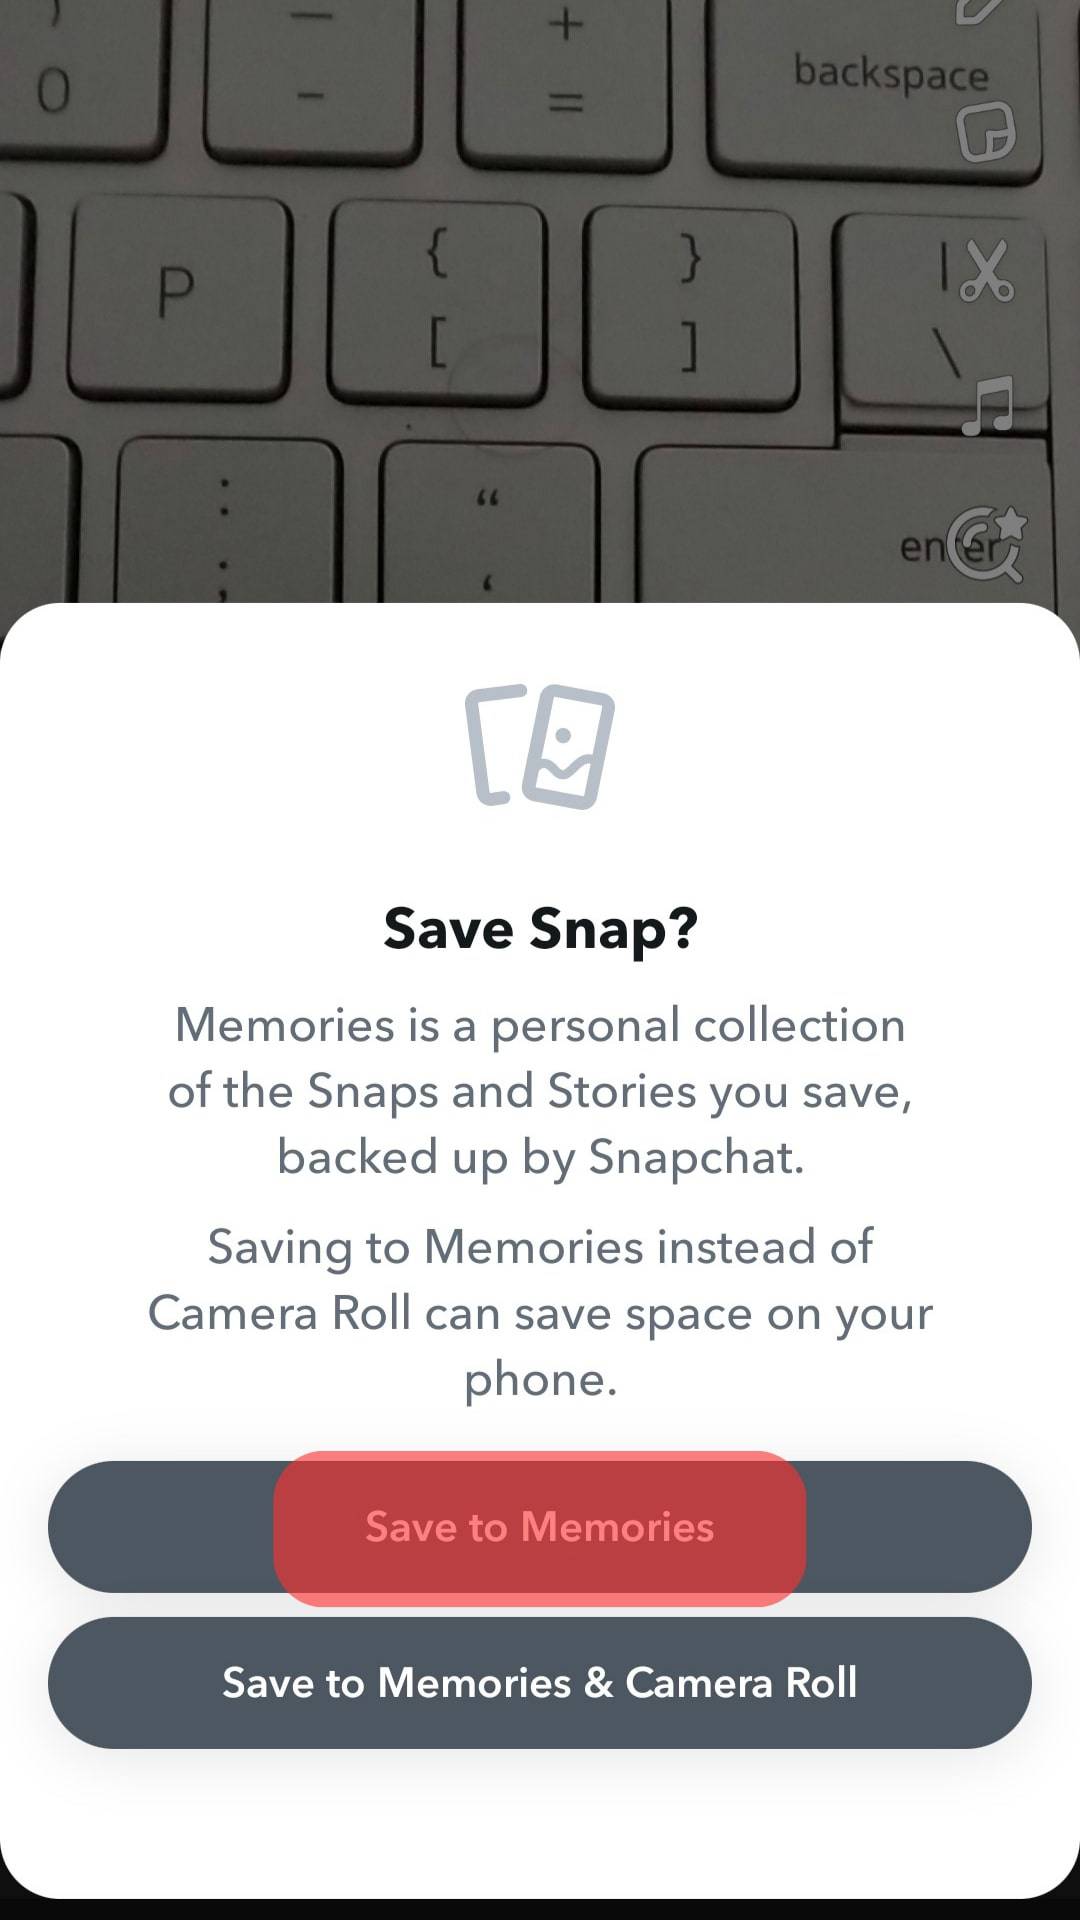 Select Save The Image To Memories.